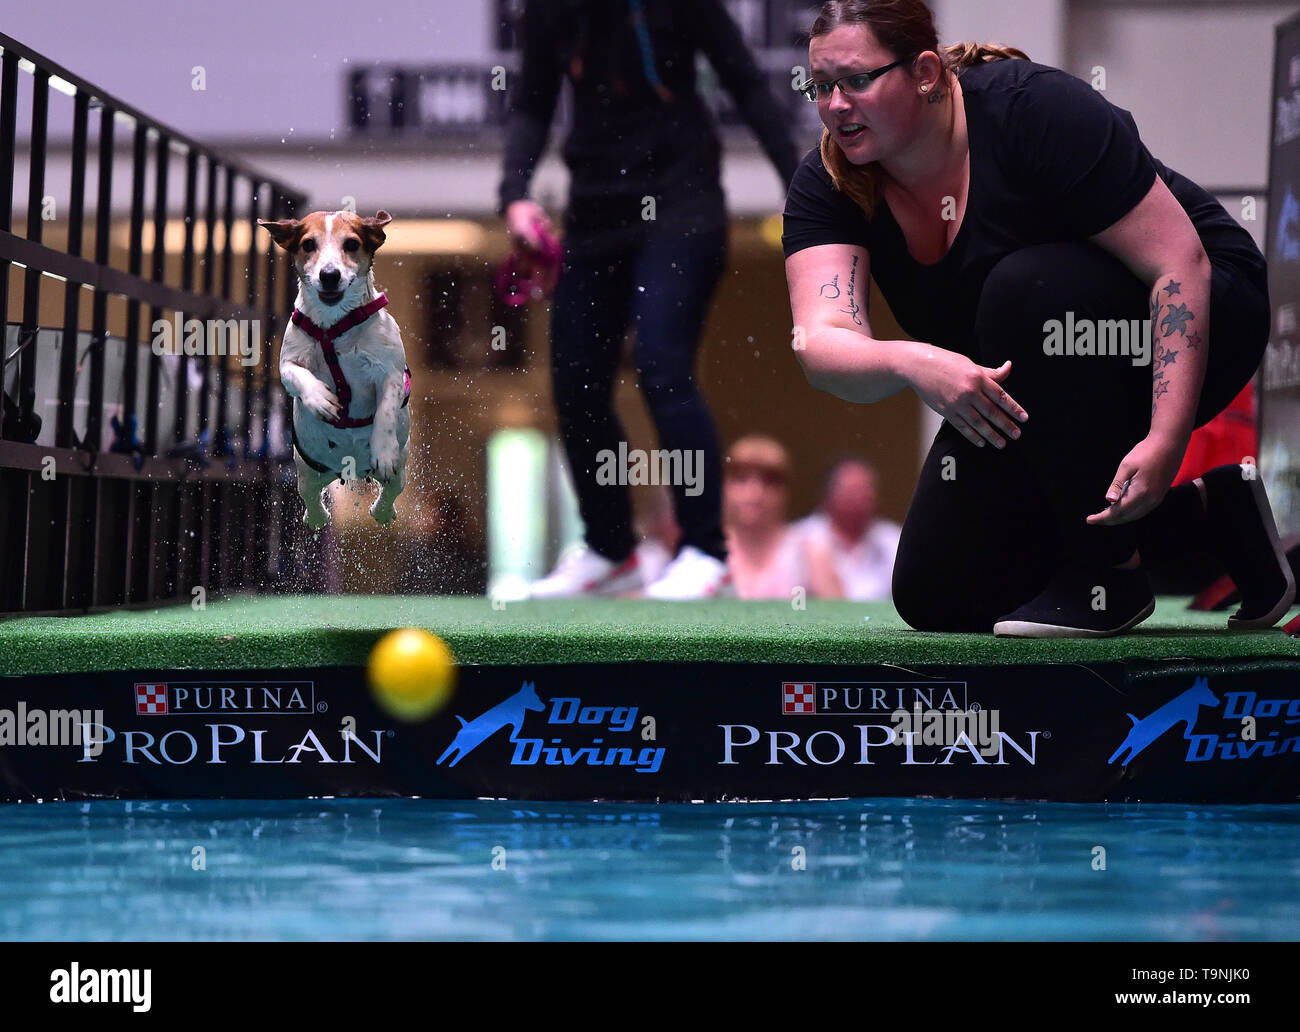 Dortmund, Germany. 19th May, 2019. A Jack Russell Terrier is seen in the "Diving Dog" competition during the Hund and Katz exhibition in Dortmund, Germany, on May 19, 2019. The three-day event hosted by German Kennel Club, presents dogs and cats of more than 200 breeds from around the world. Credit: Lu Yang/Xinhua/Alamy Live News Stock Photo